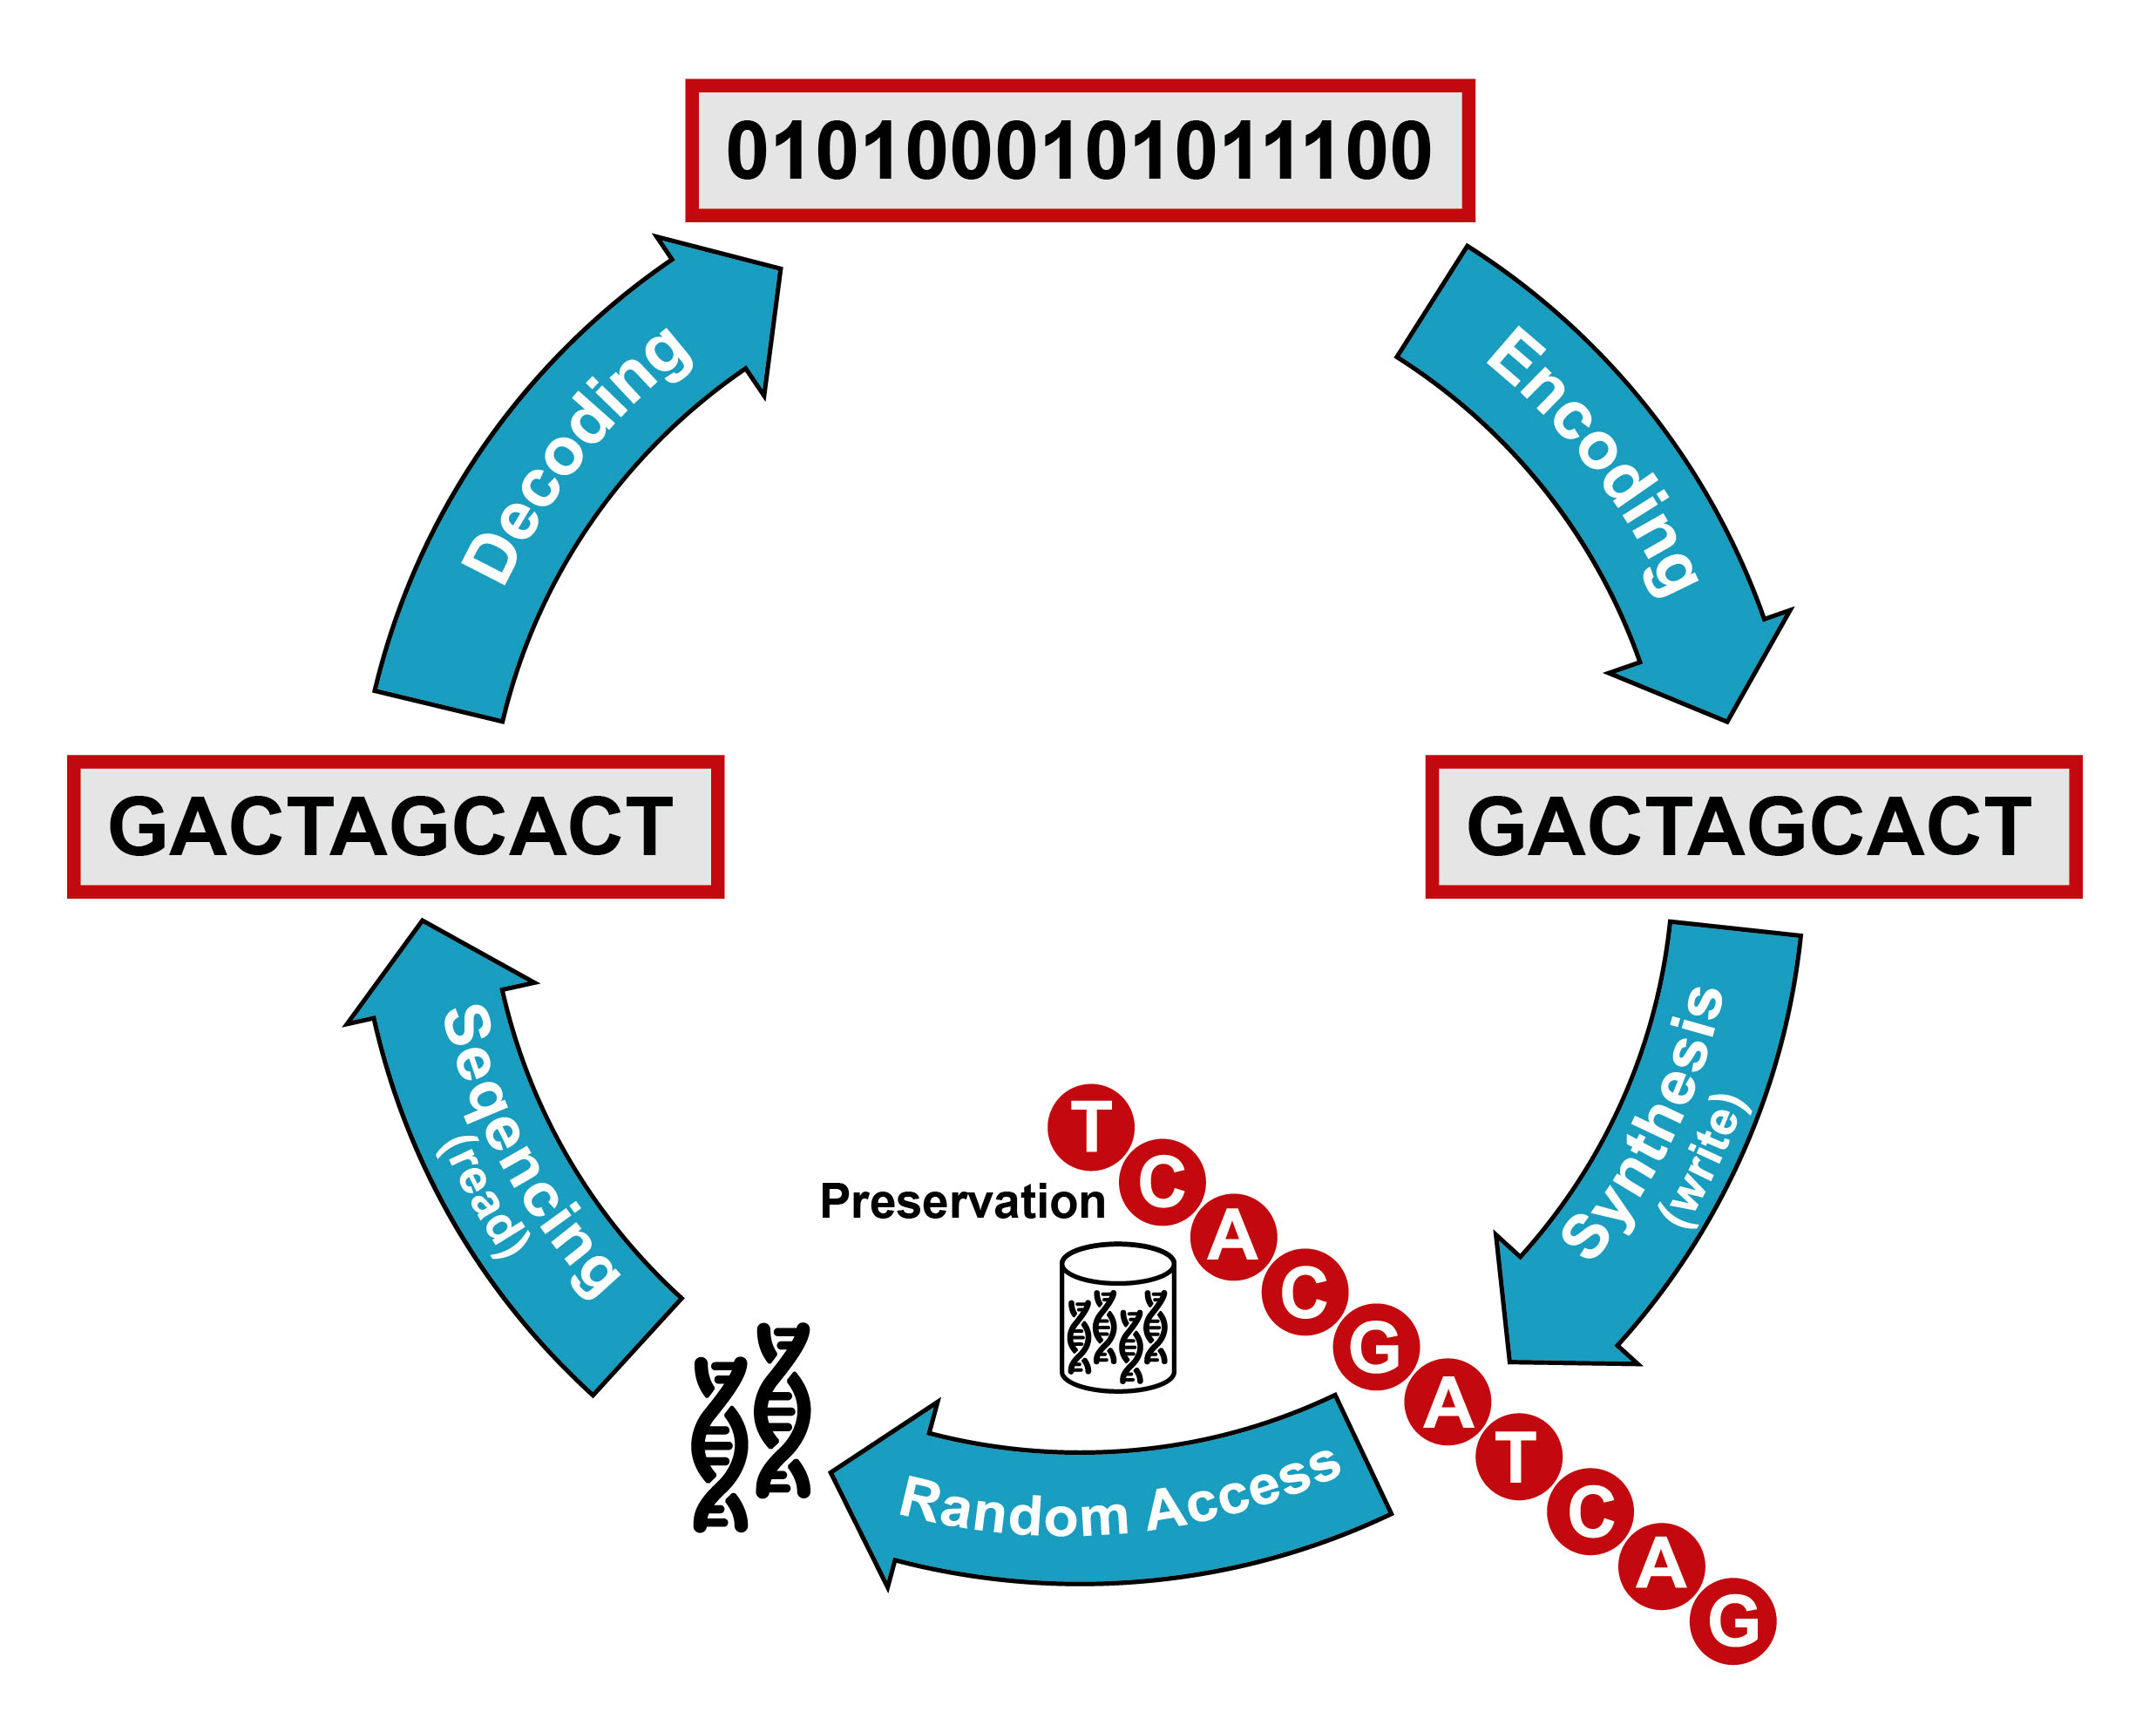 An illustration demonstrating using DNA as physical media in a molecular information storage system.